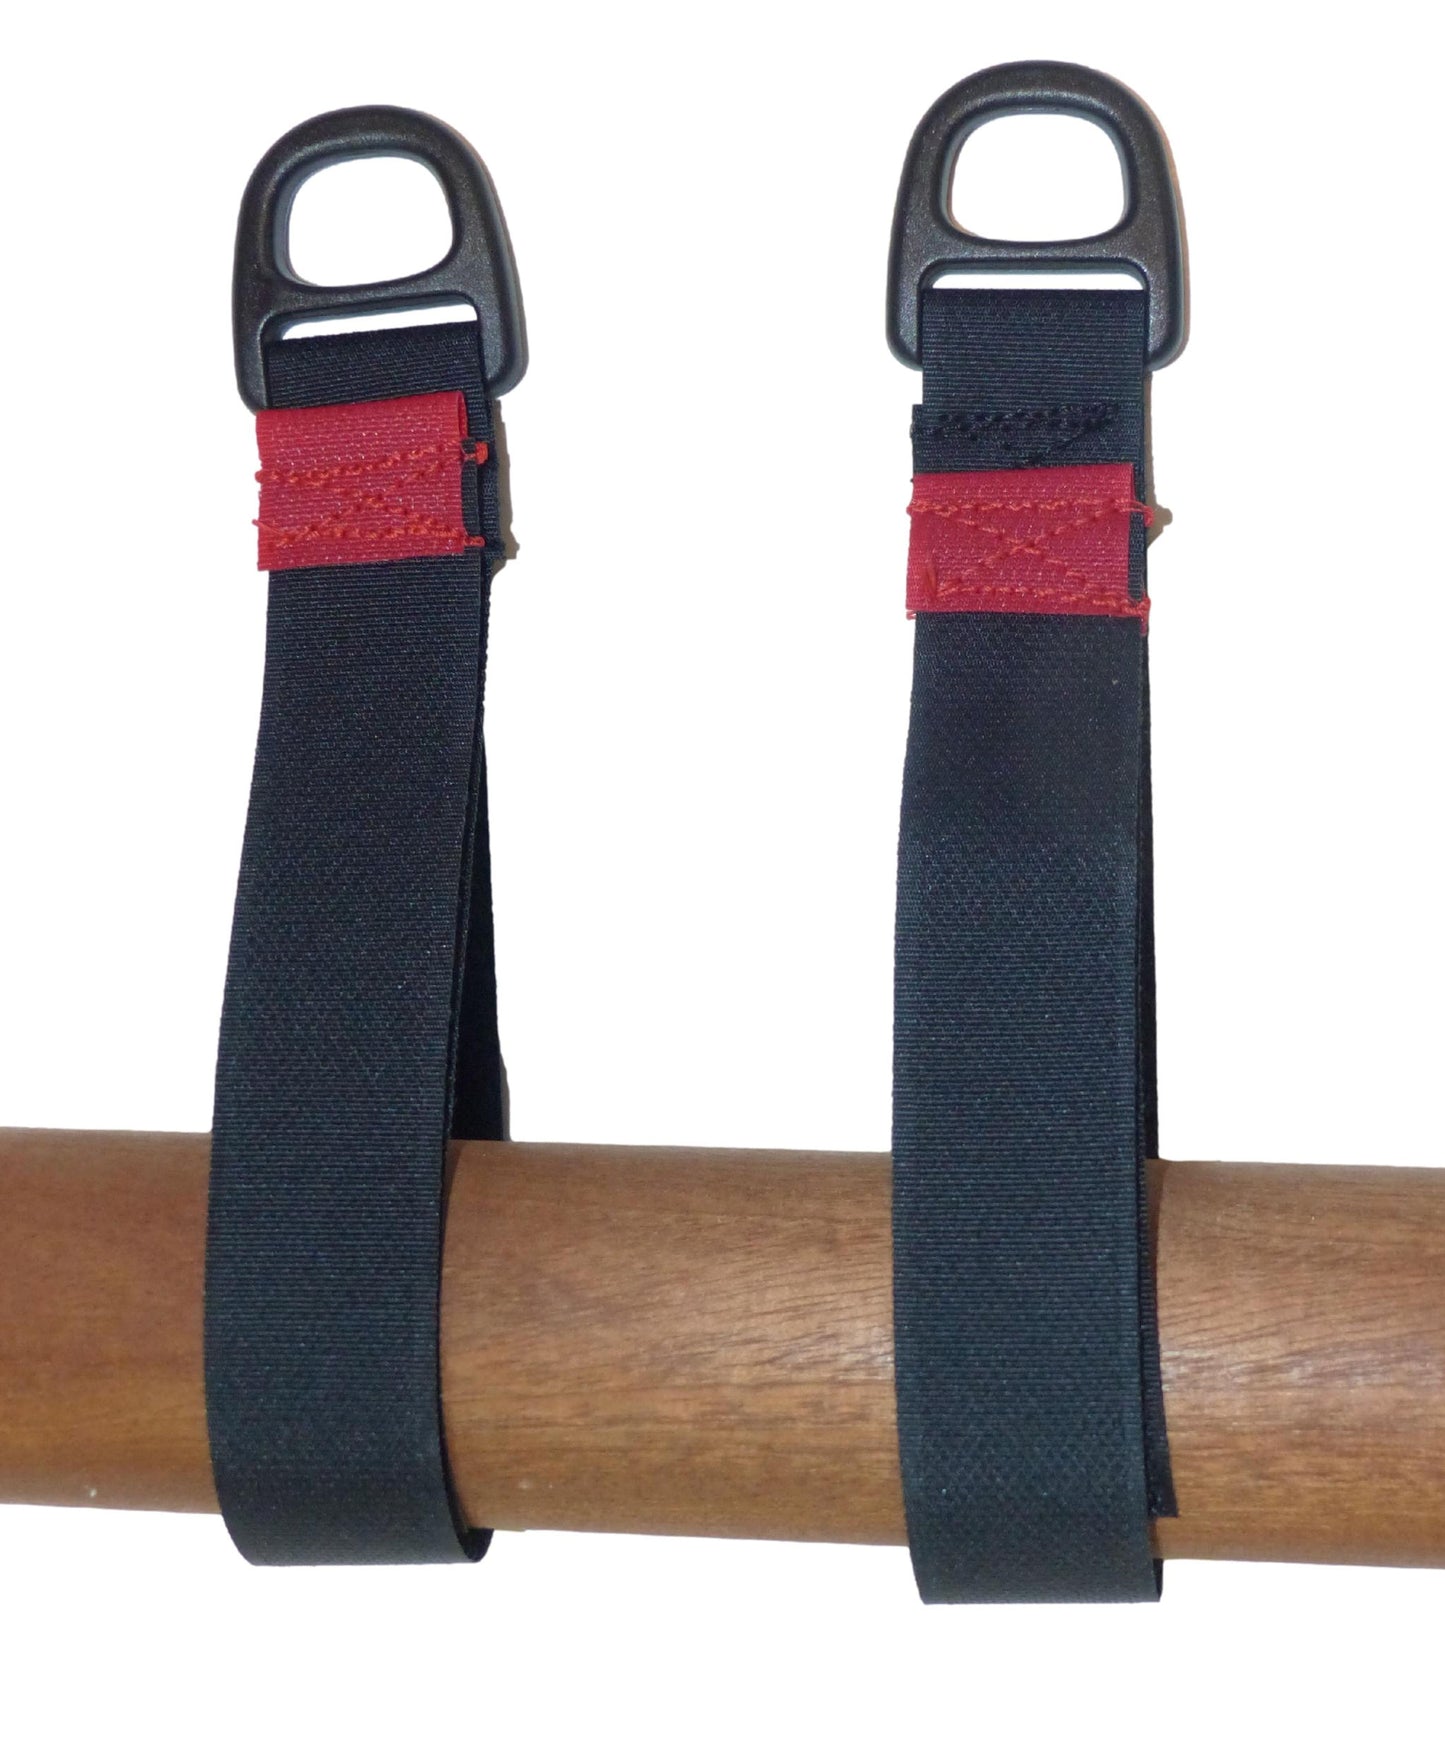 Benristraps 25mm Hook & Loop Tidy & Hang Strap with Plastic Ring (Pack of 2) in black